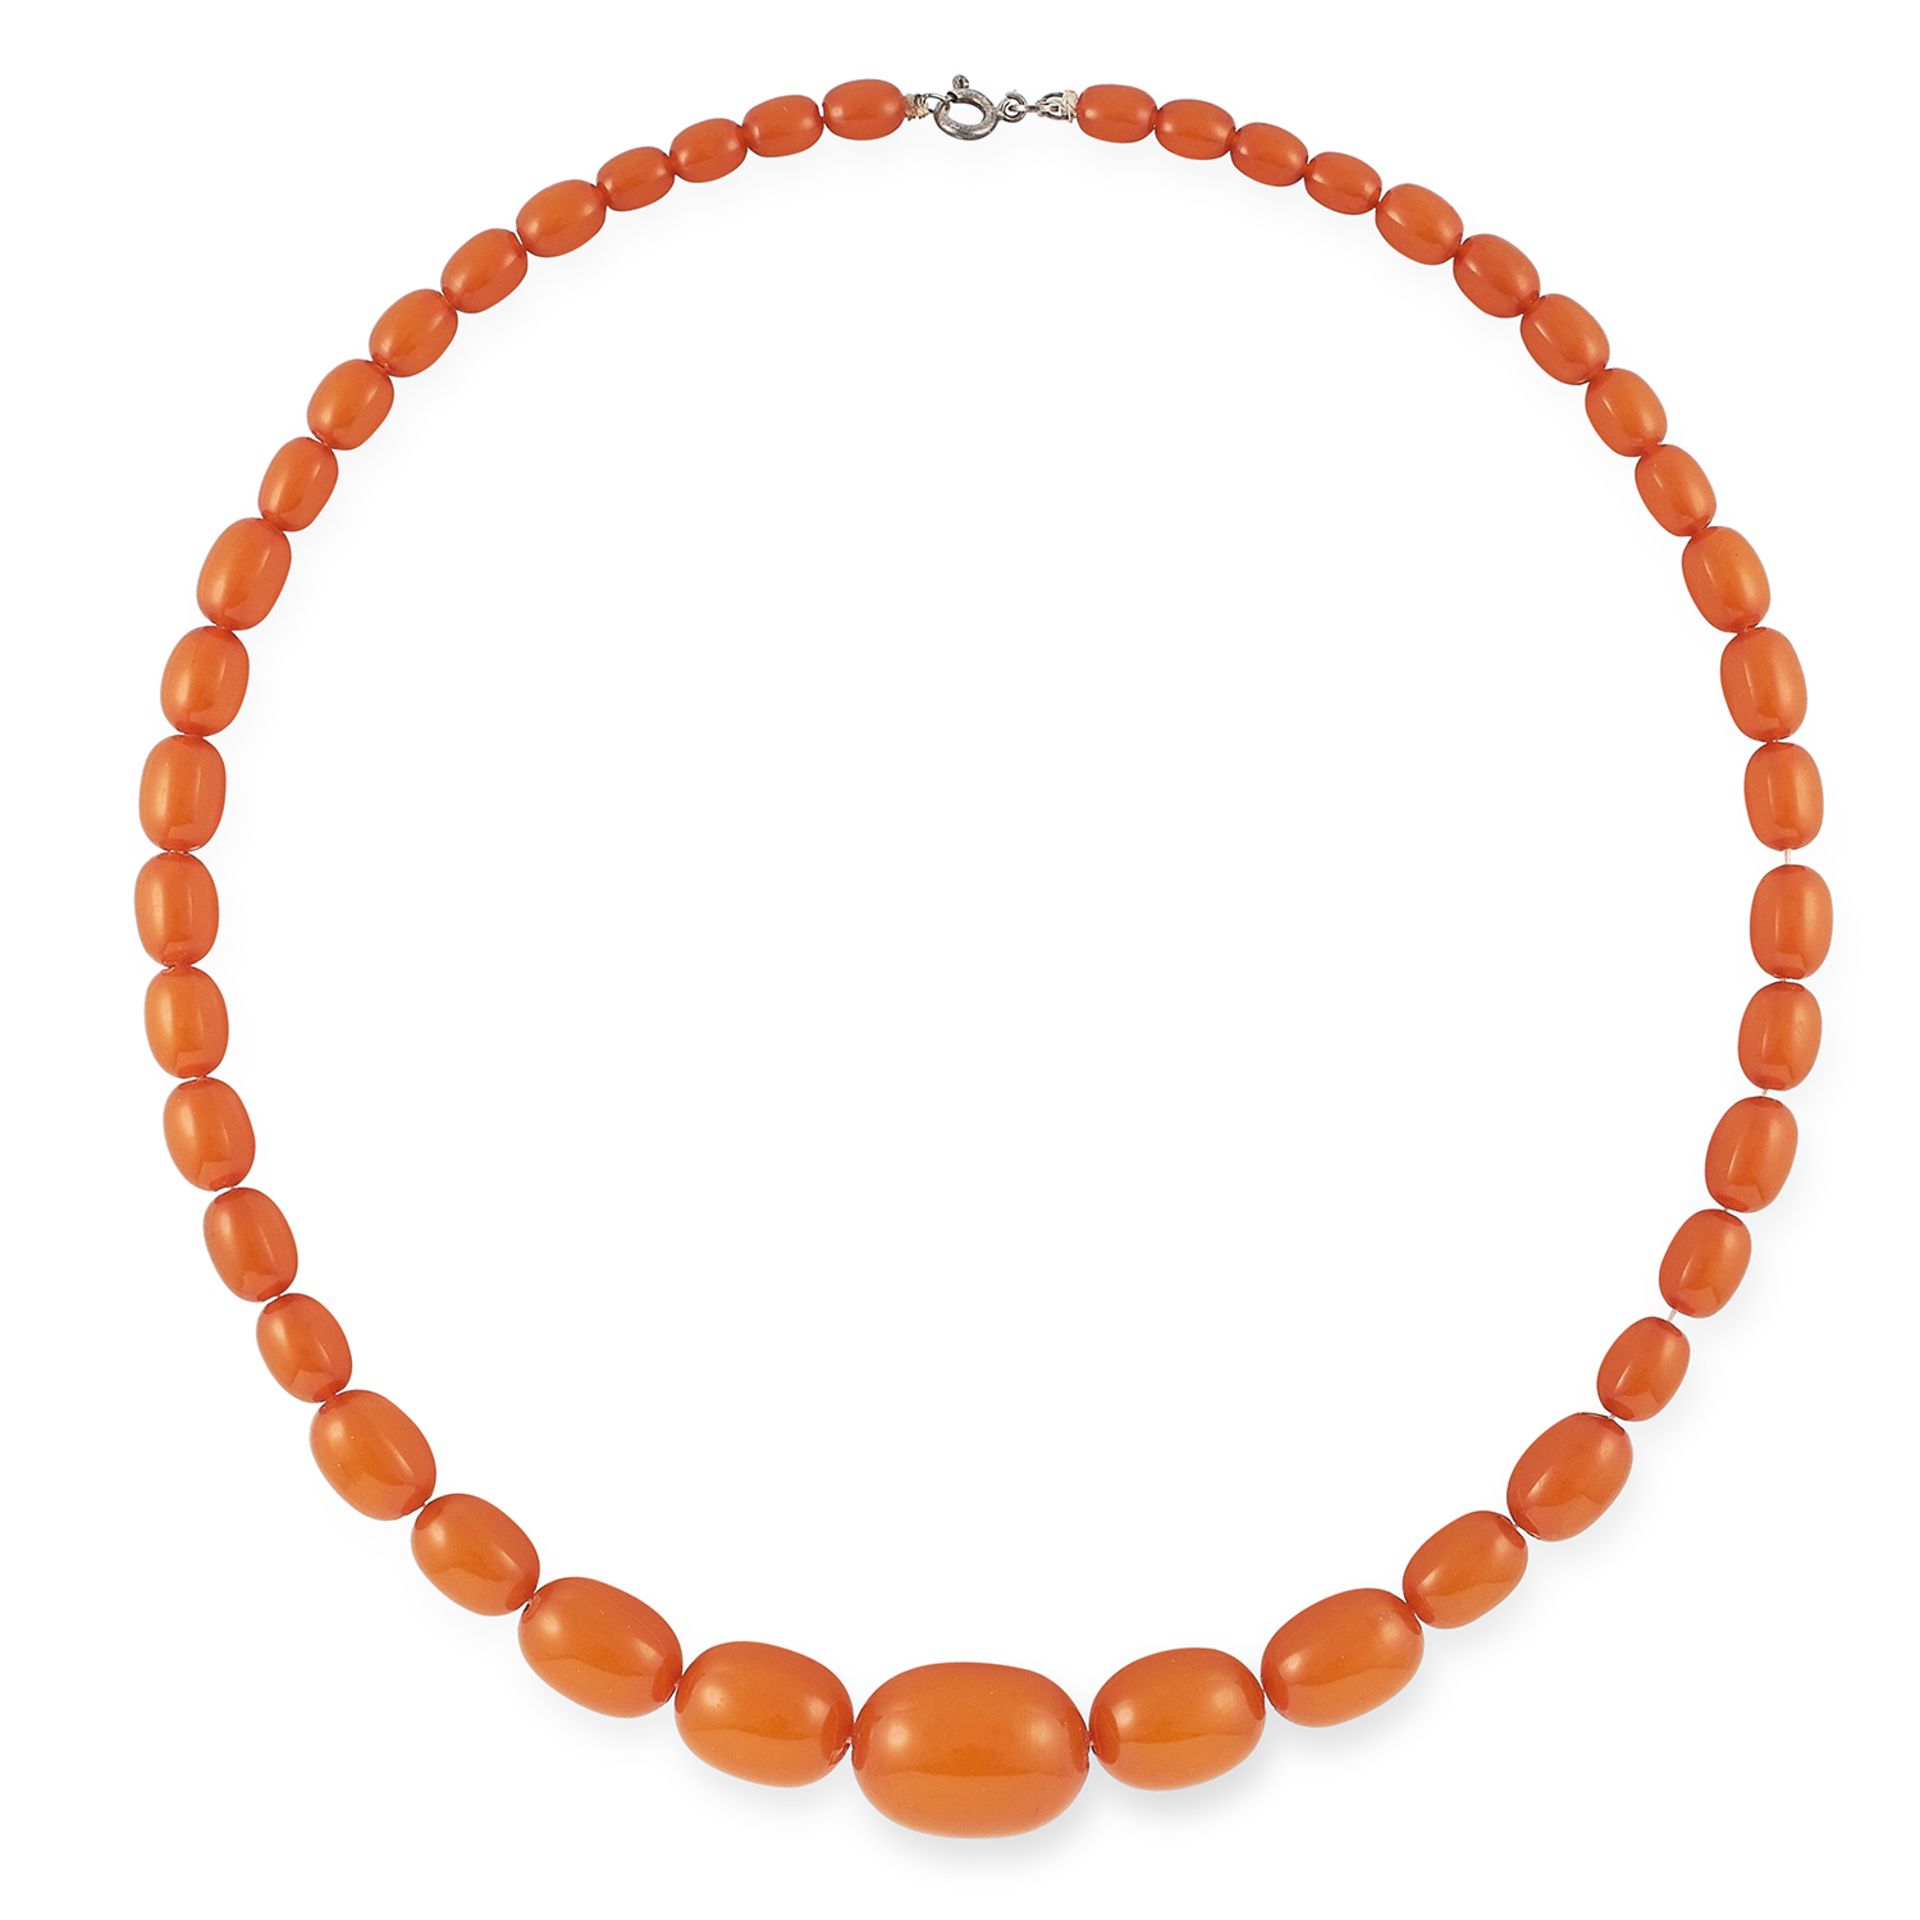 BUTTERSCOTCH AMBER BEAD NECKLACE set with polished amber beads, 46cm, 19.8g.